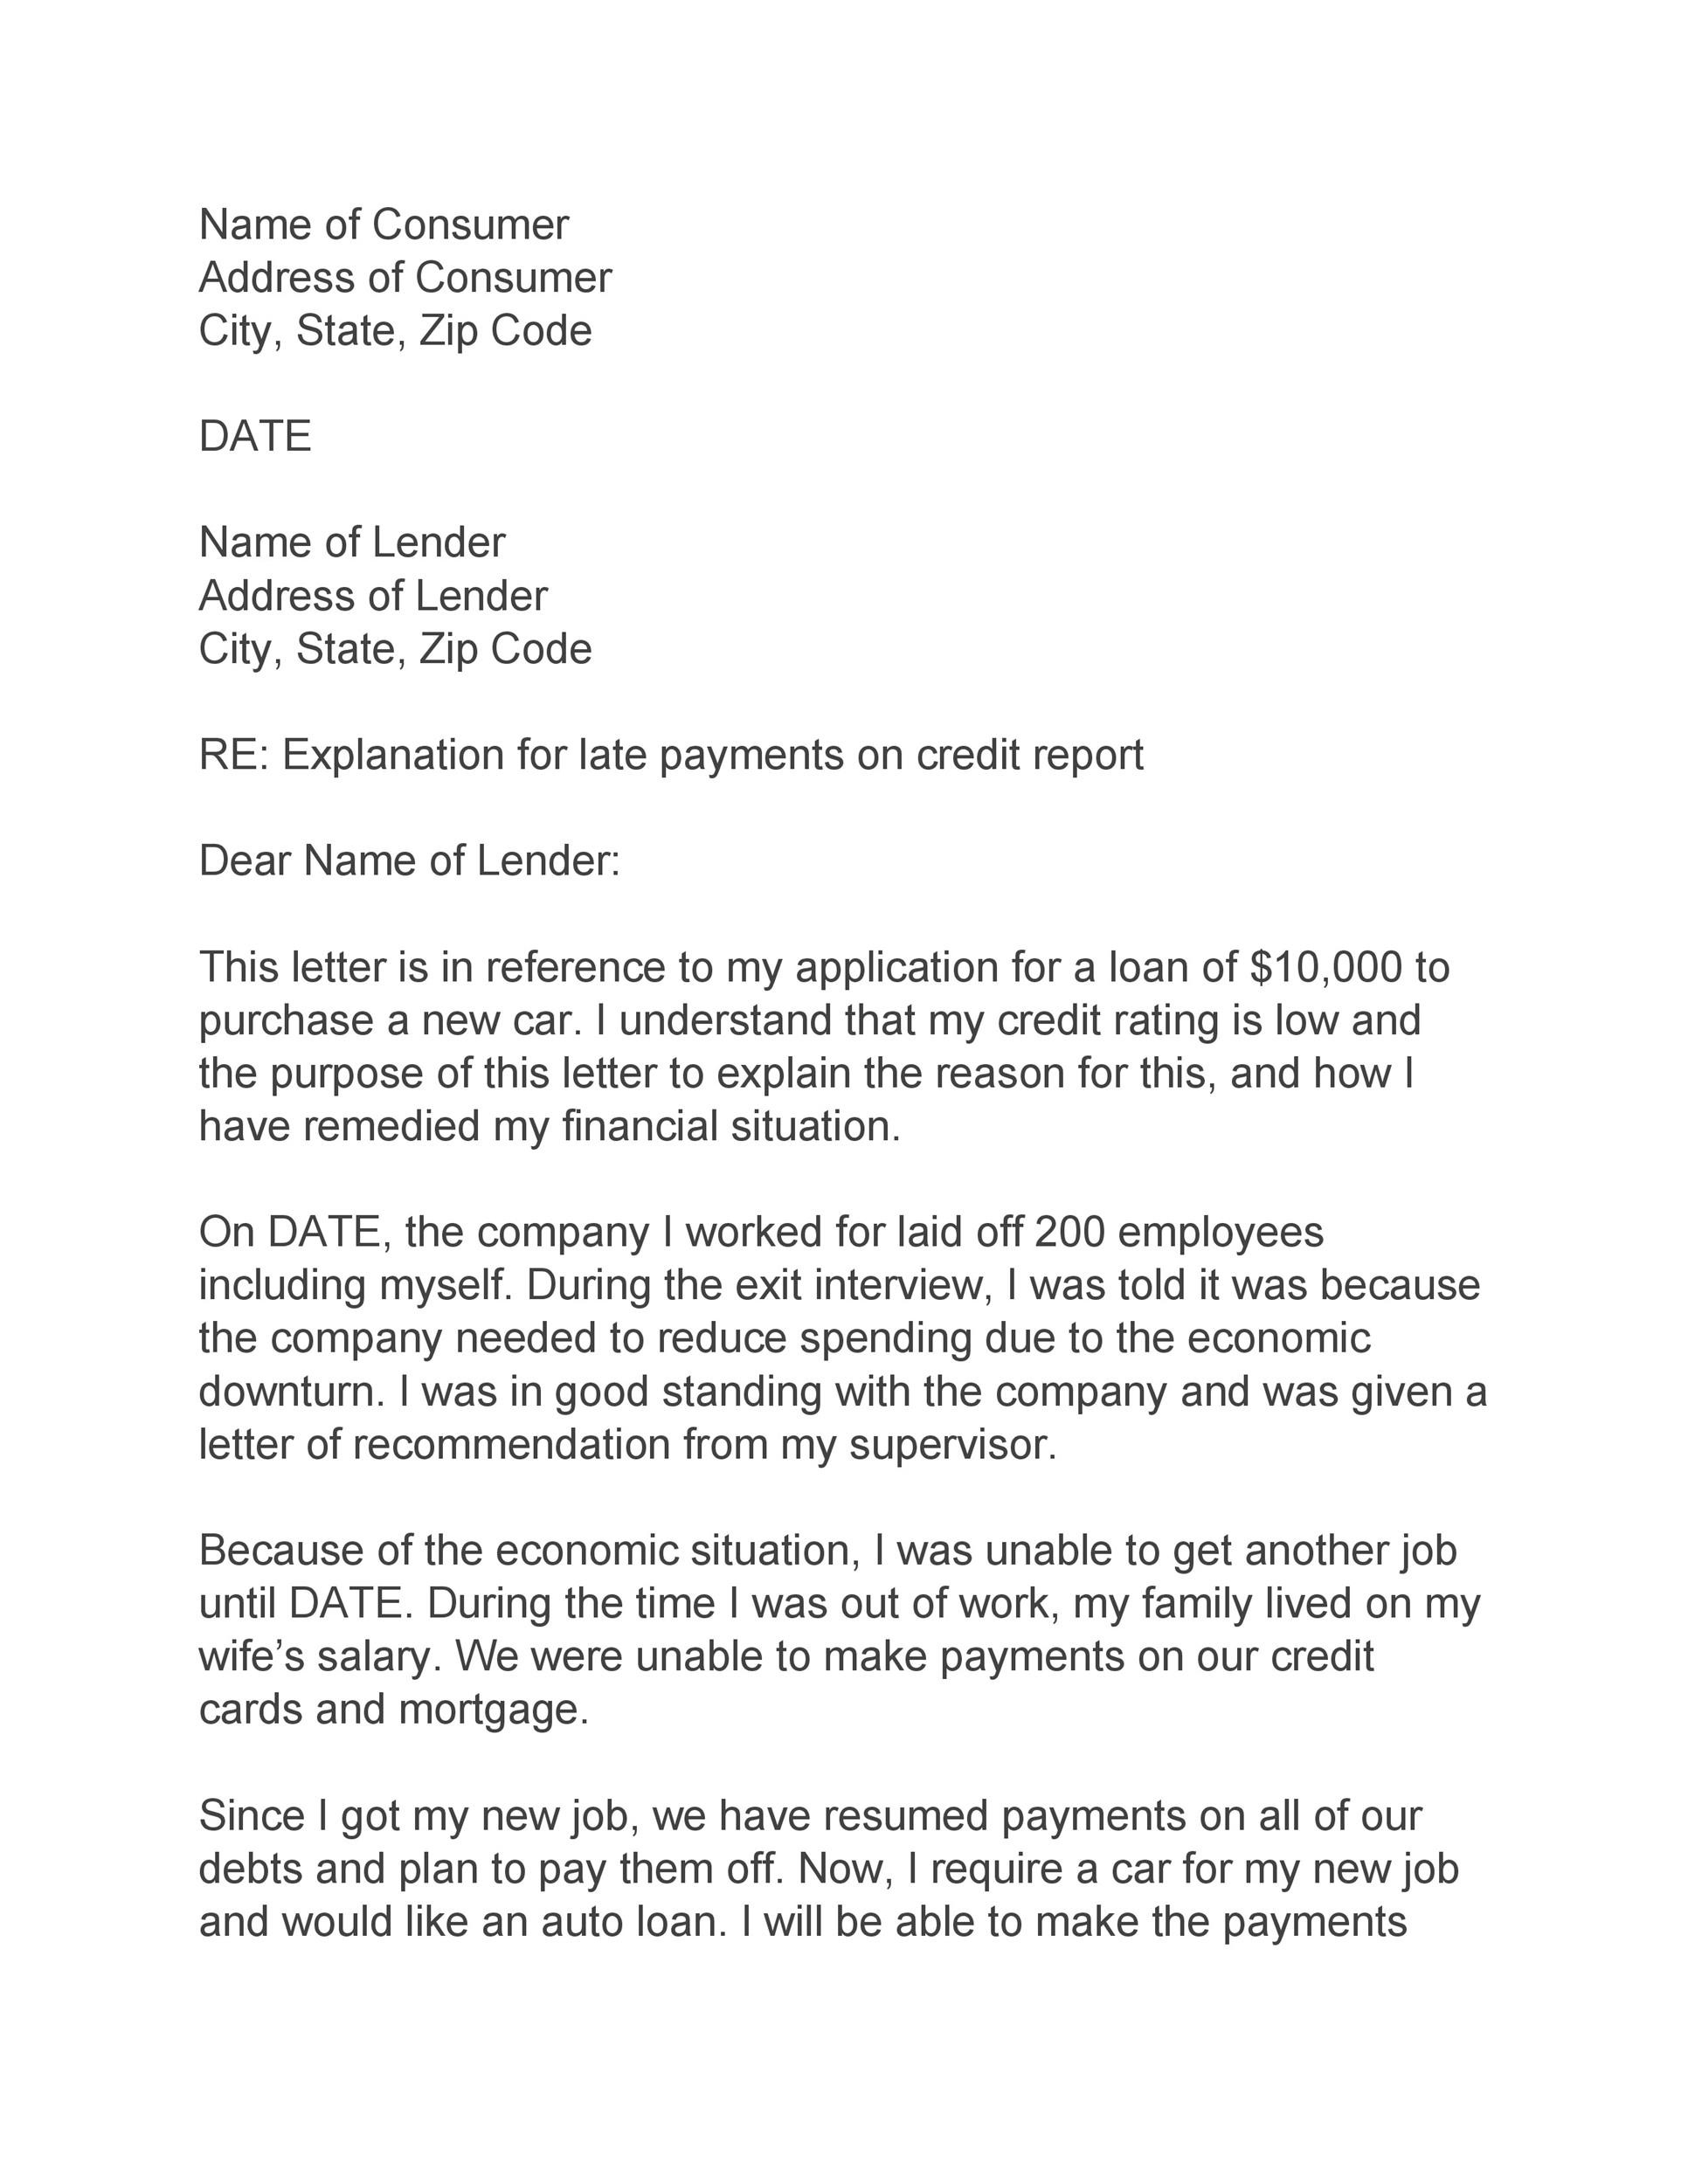 Sample Letter Of Explanation For Bankruptcy from templatelab.com